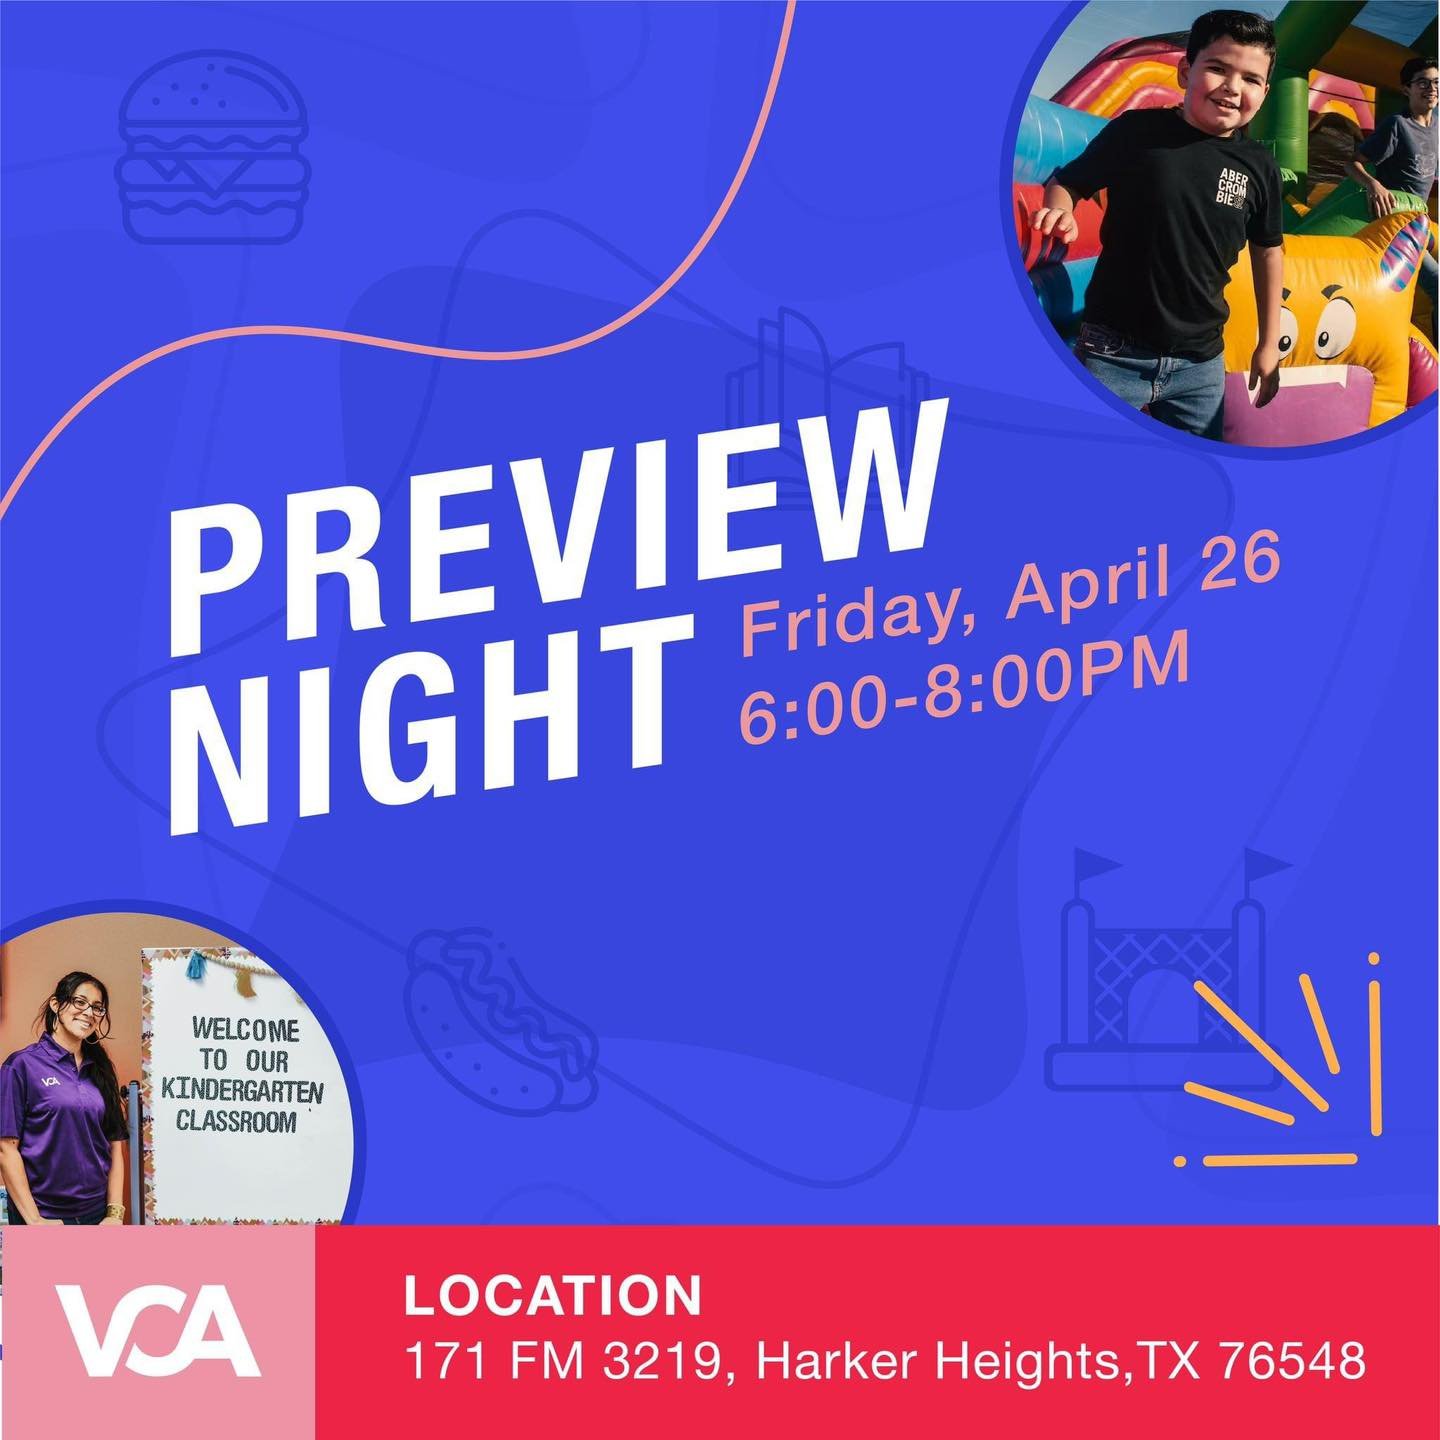 Tomorrow night is PREVIEW NIGHT! If you haven&rsquo;t checked out Vintage Christian Academy, now is your chance! We started VCA because we know parents are looking for options in education. If you desire &quot;a Christian classical alternative to pub